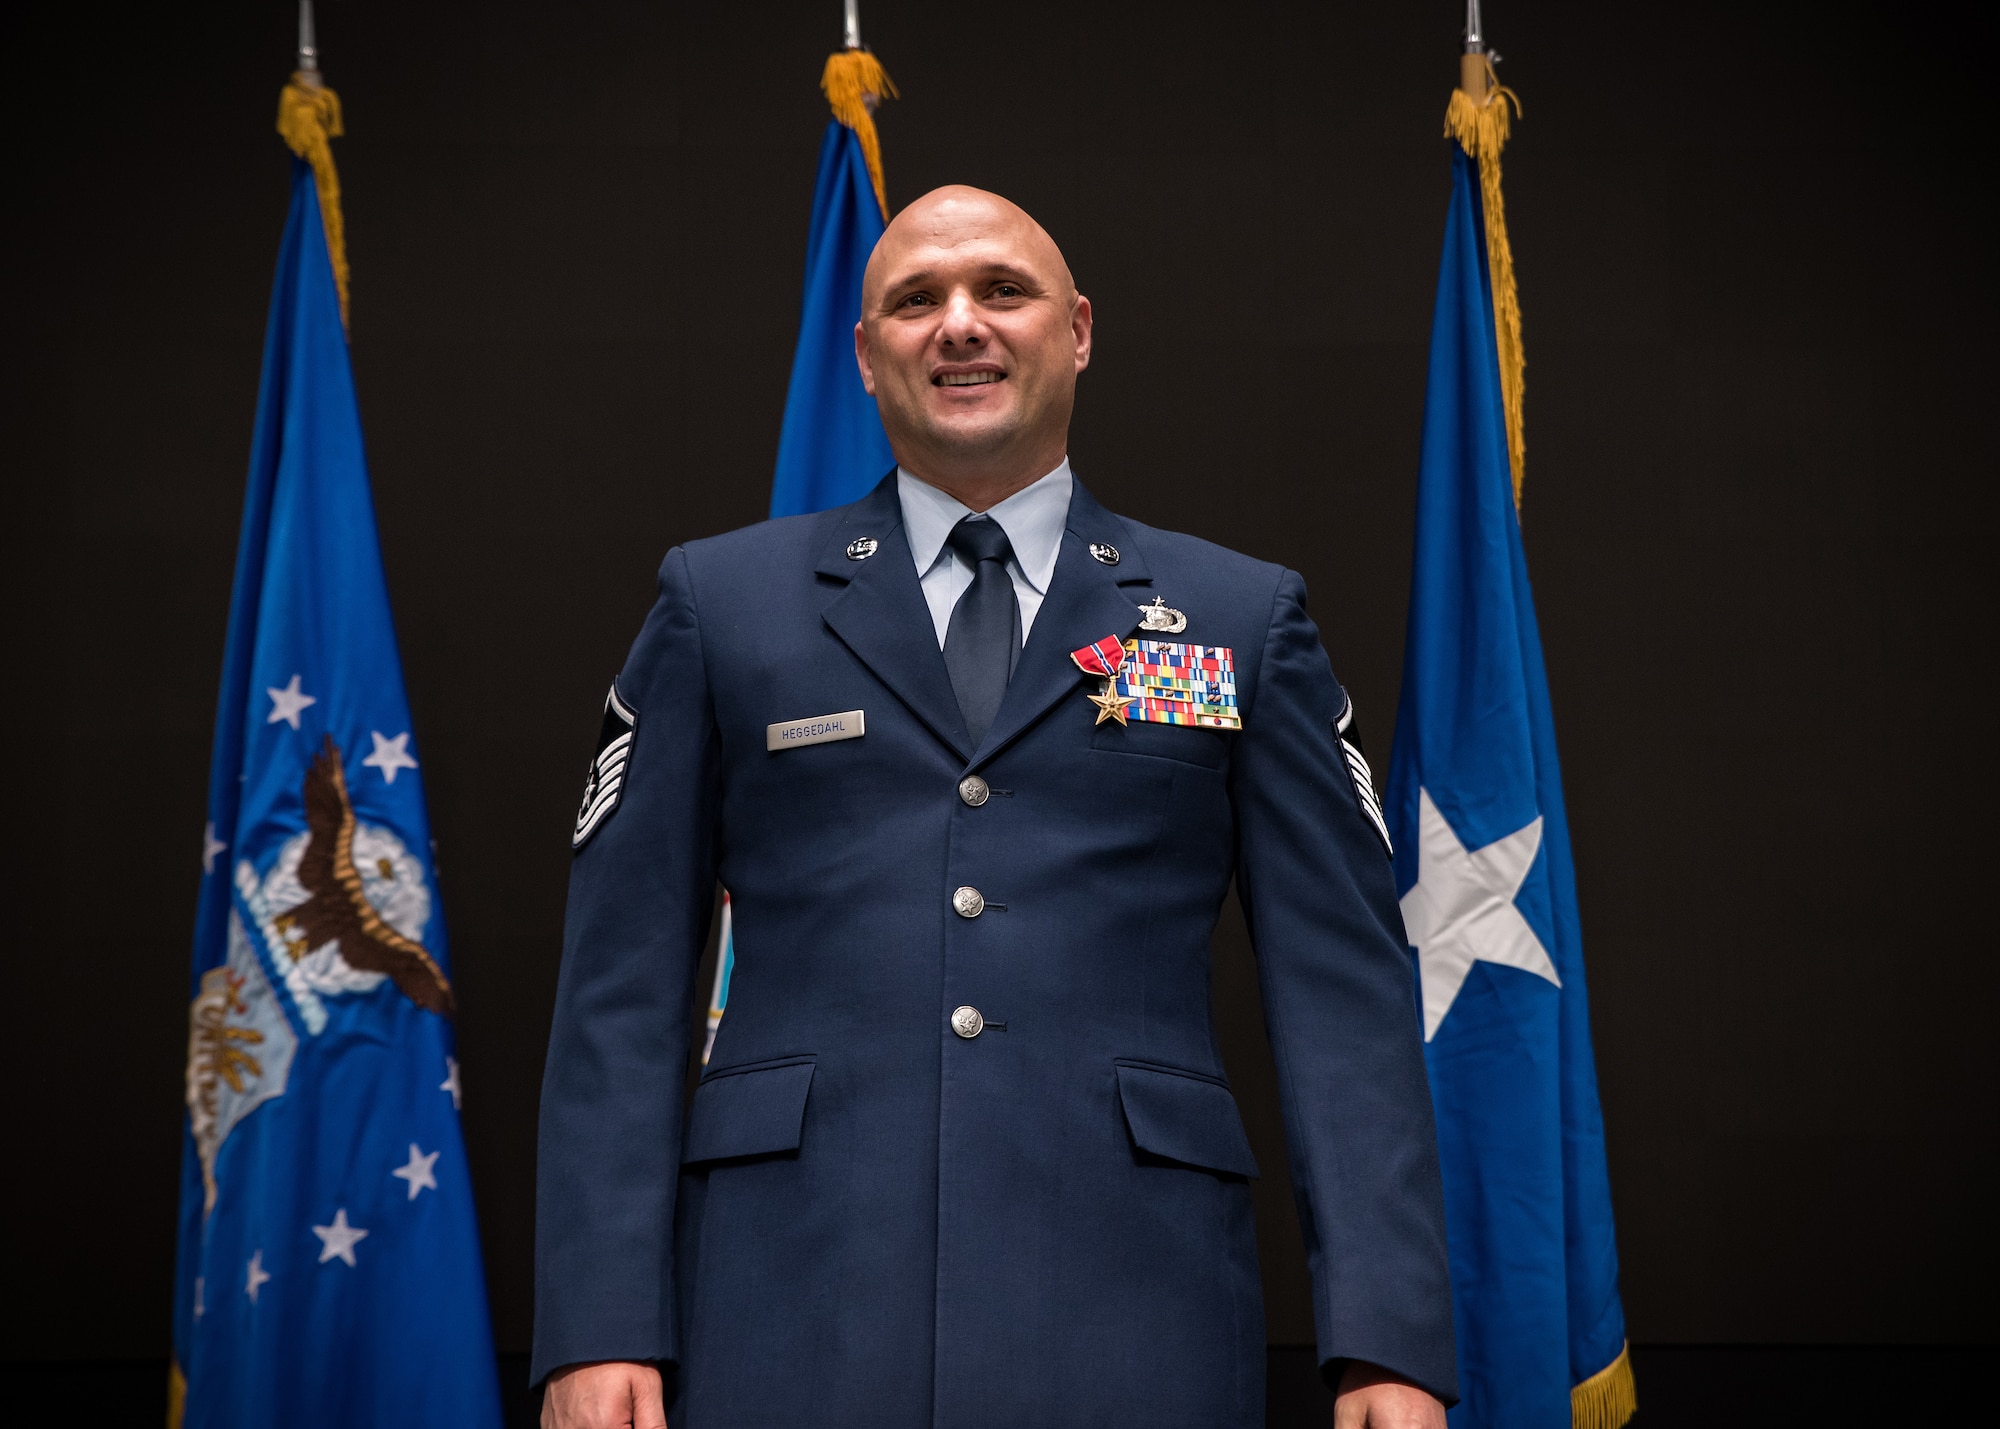 The Bronze Star was presented to Master Sgt. Timothy L. Heggedahl, an intelligence analyst, during a ceremony at the Air Force Institute of Technology, Wright-Patterson Air Force Base, on Feb. 26, 2020. Heggedahl distinguished himself by meritorious achievement while engaged in military operations in Iraq from Nov. 18, 2018, to June 25, 2019. (U.S. Air Force photo/Richard Eldridge)